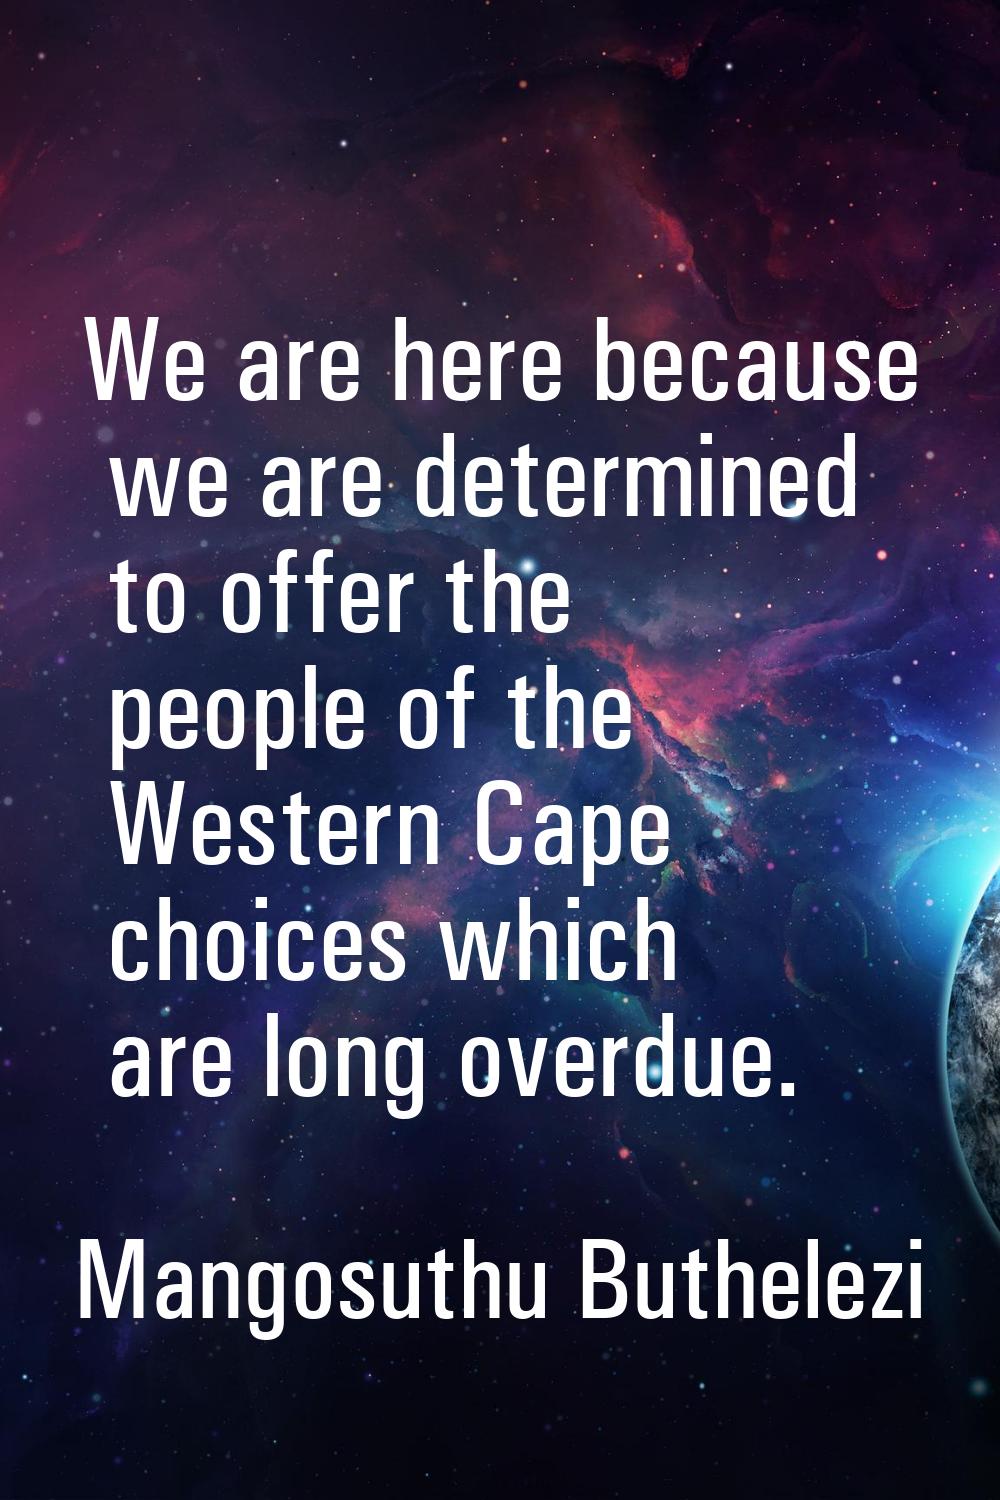 We are here because we are determined to offer the people of the Western Cape choices which are lon